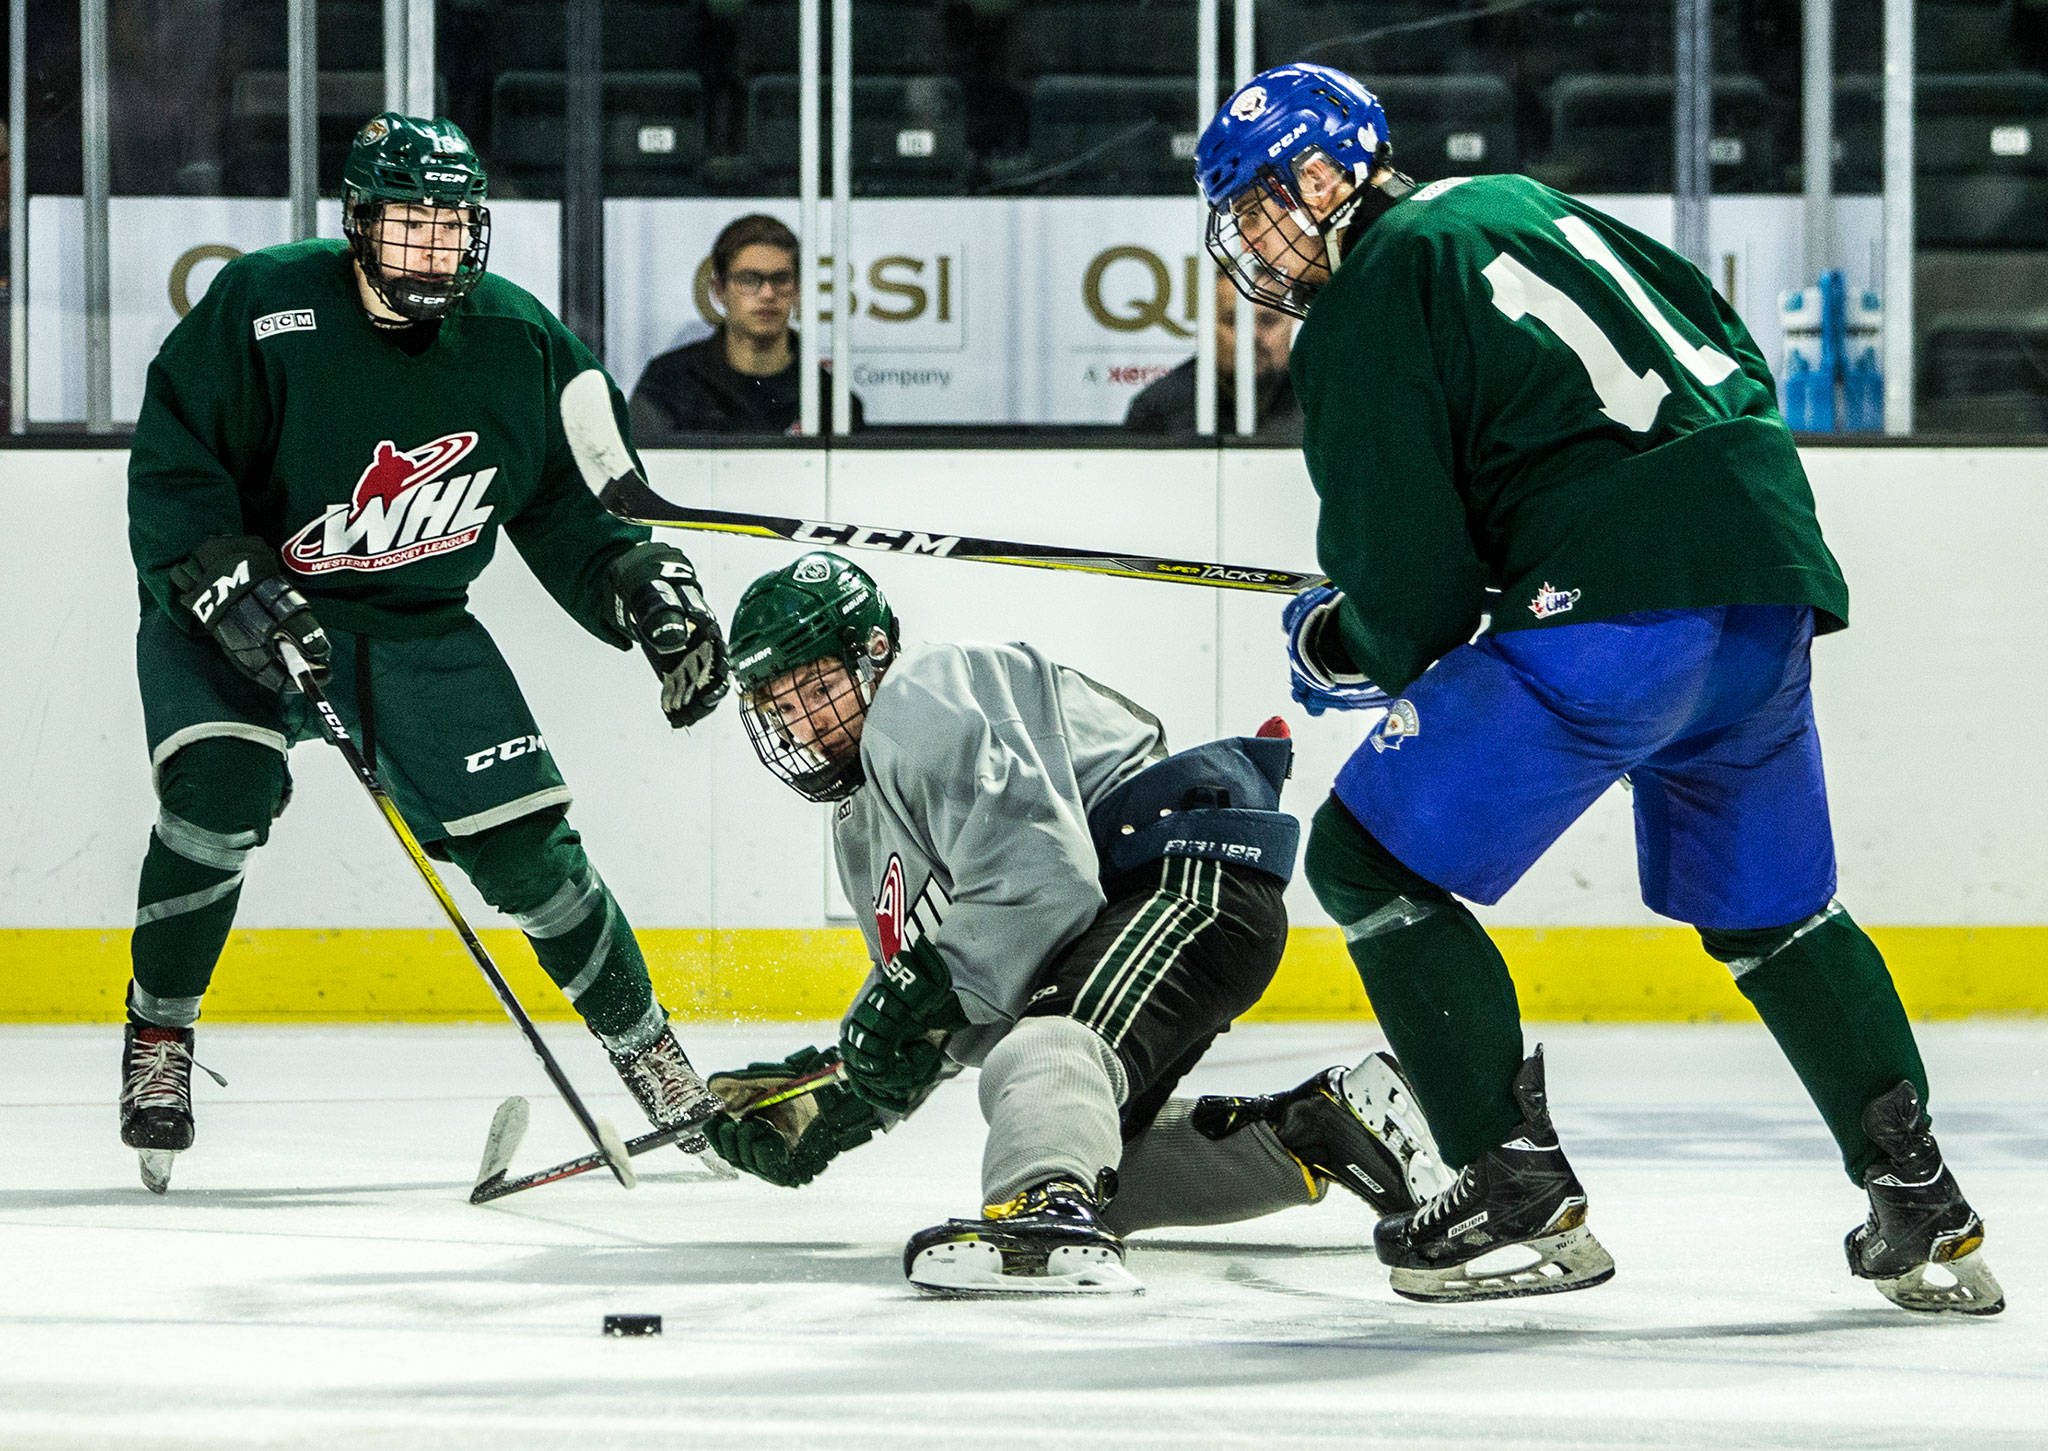 Jack Lambert (center) scrambles for the puck with Nate Goodbrandson (left) and Blake Setter (right) during the Slivertips’ annual Green vs. Grey scrimmage Sunday at Everett’s Angel of the Winds Arena. (Olivia Vanni / The Herald)